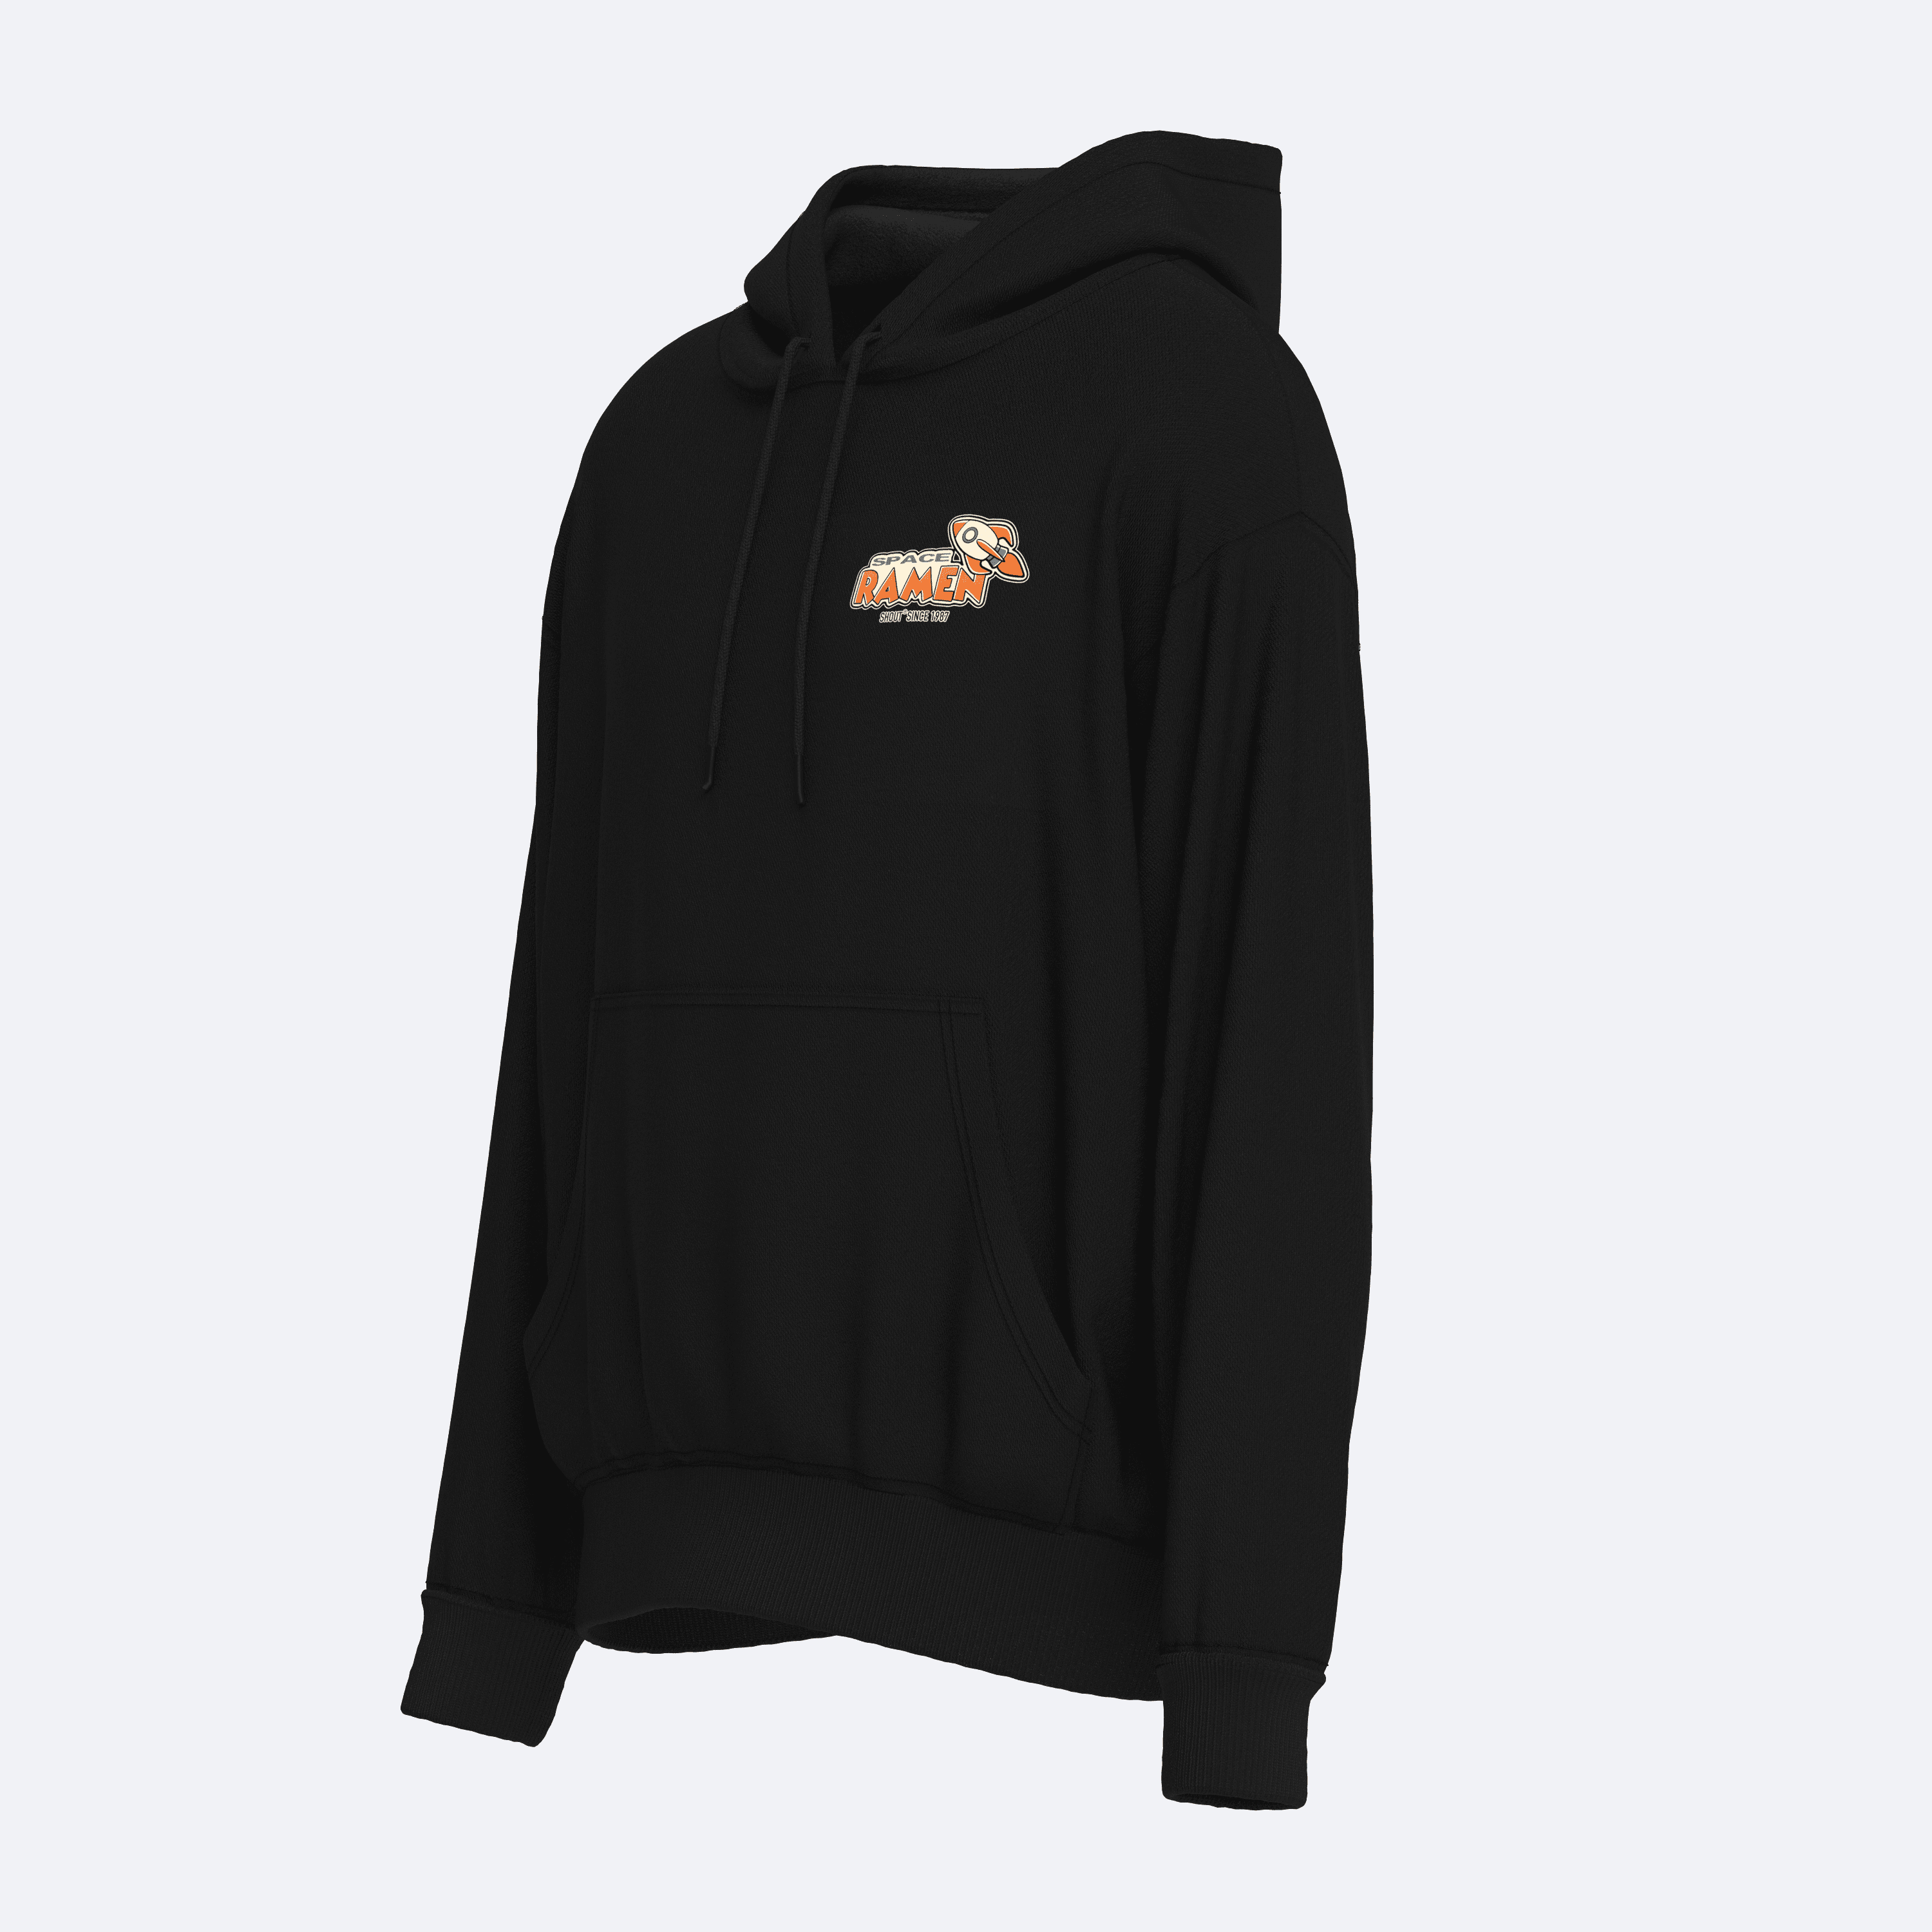 Oversize Shout Space Ramen Delivery Unisex Hoodie